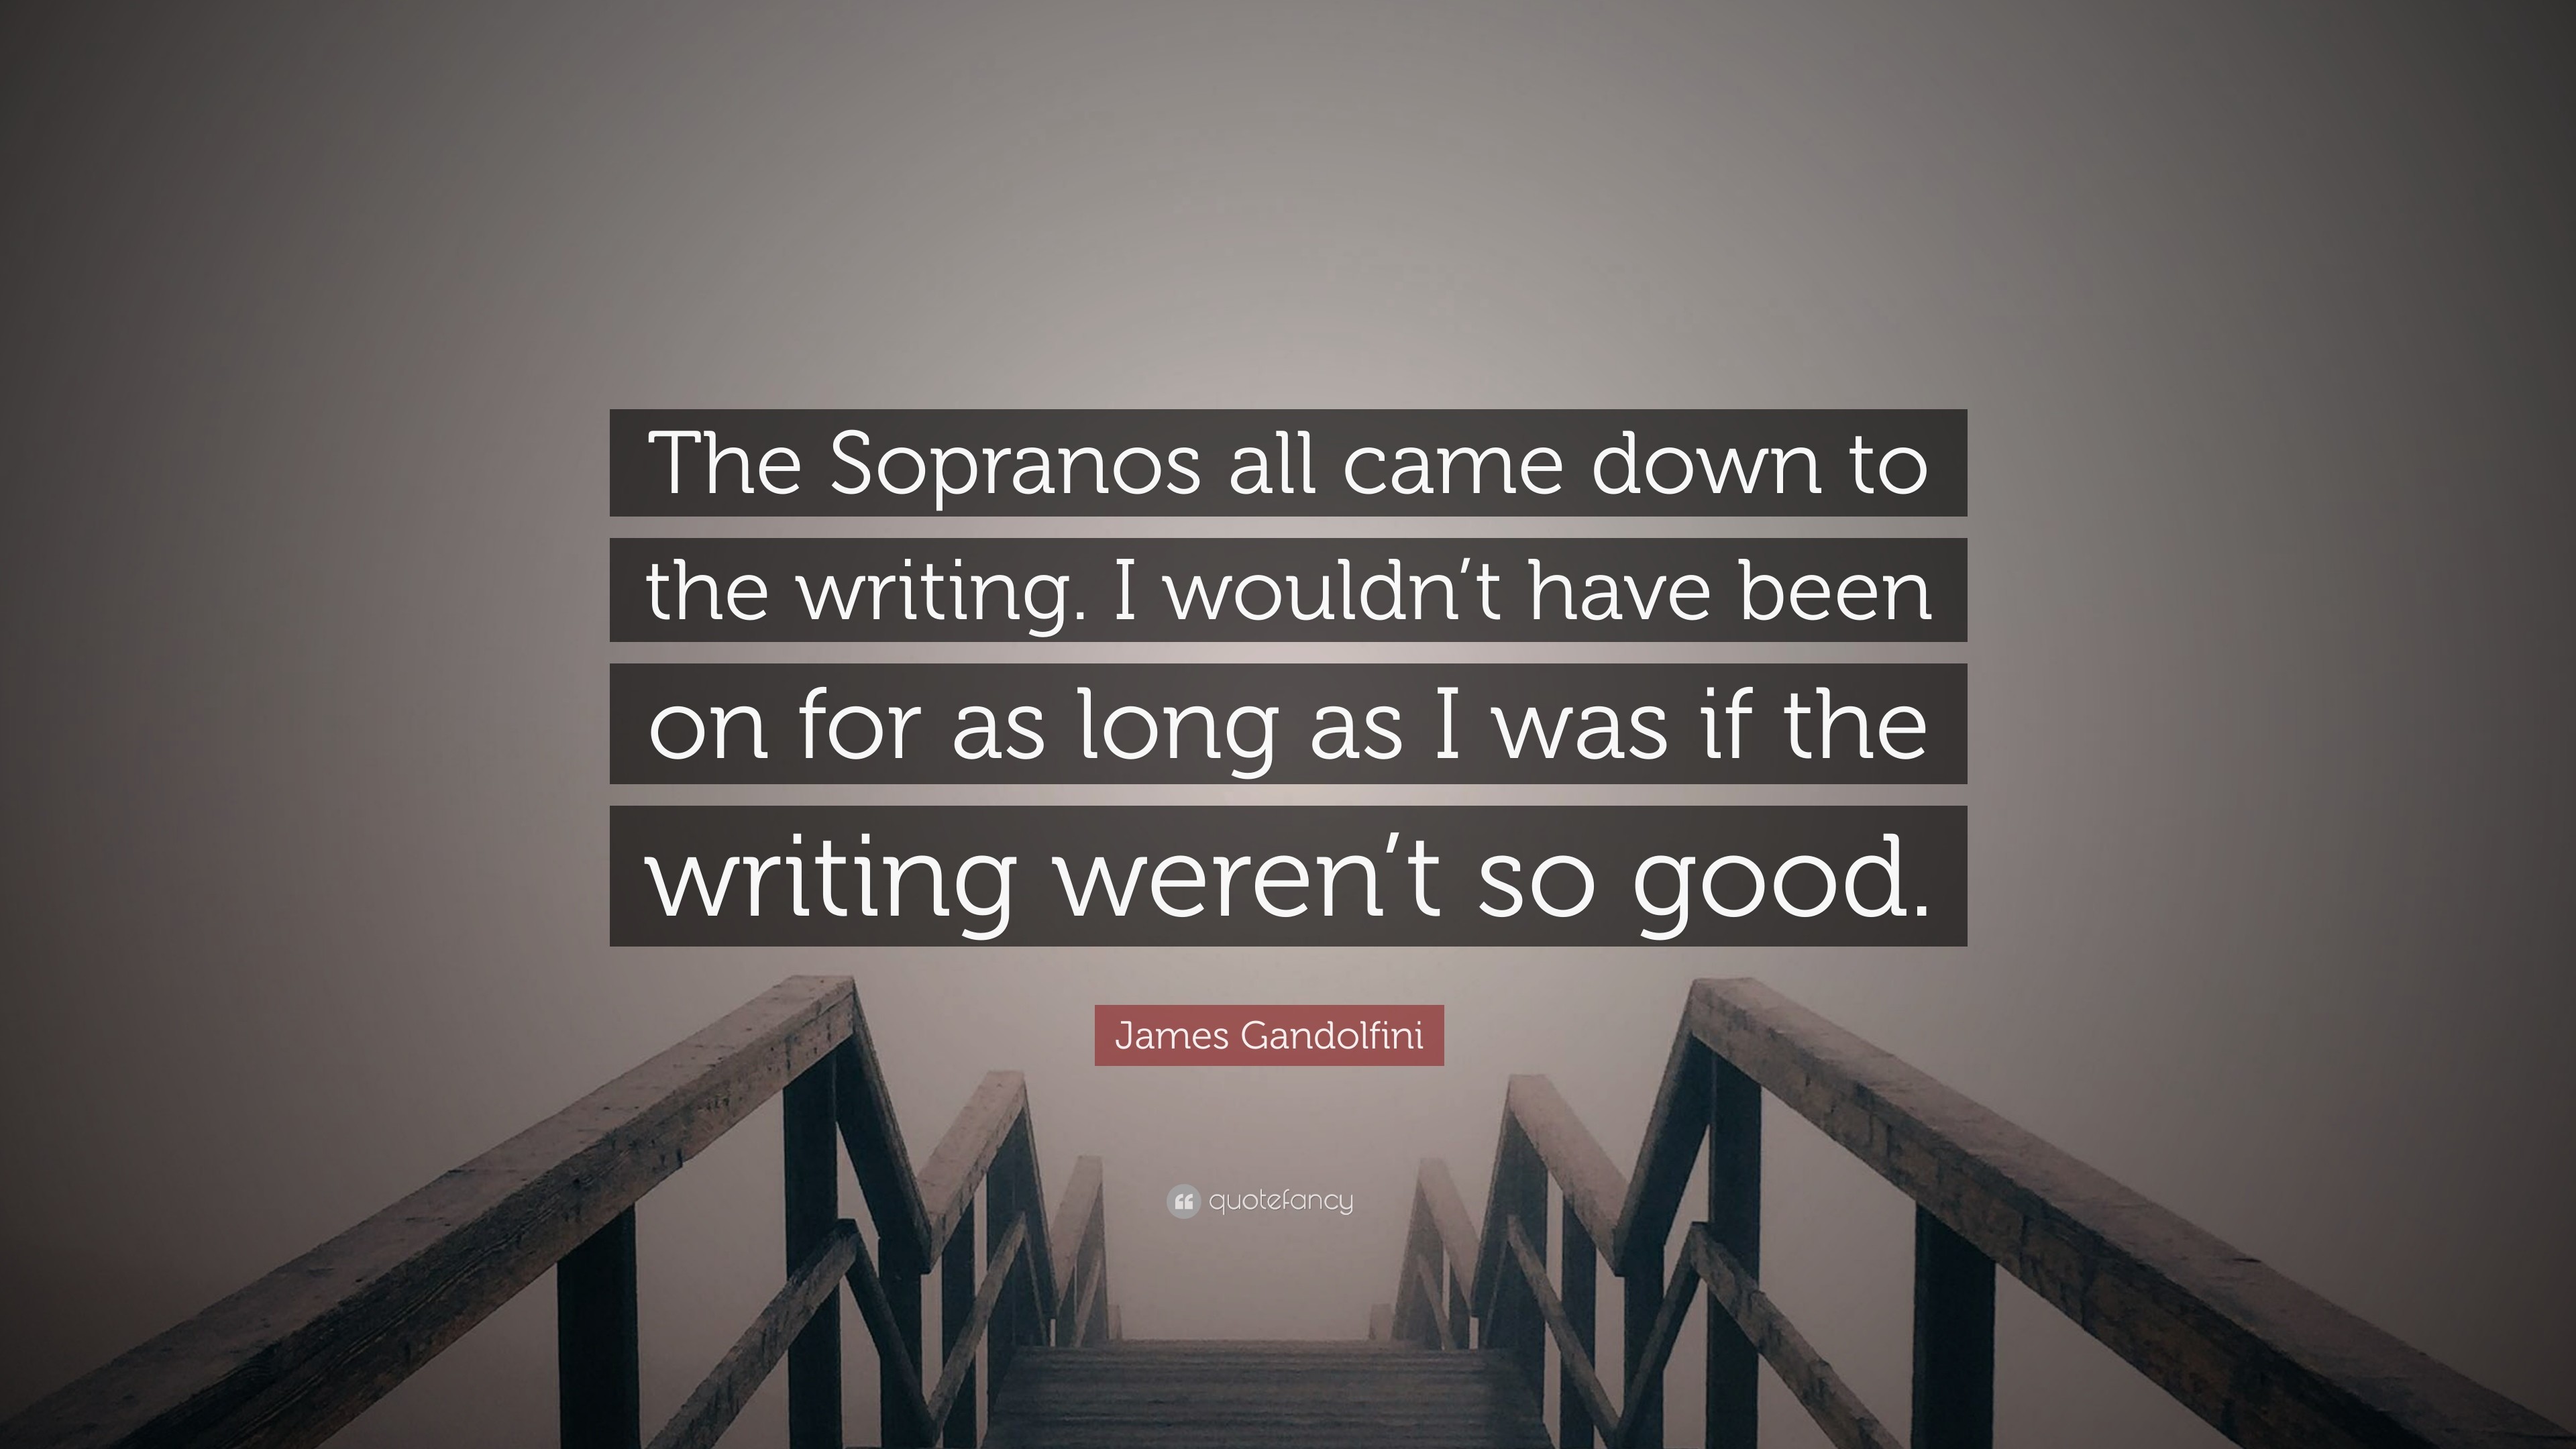 3840x2160 James Gandolfini Quote: “The Sopranos all came down to the writing. I wouldn